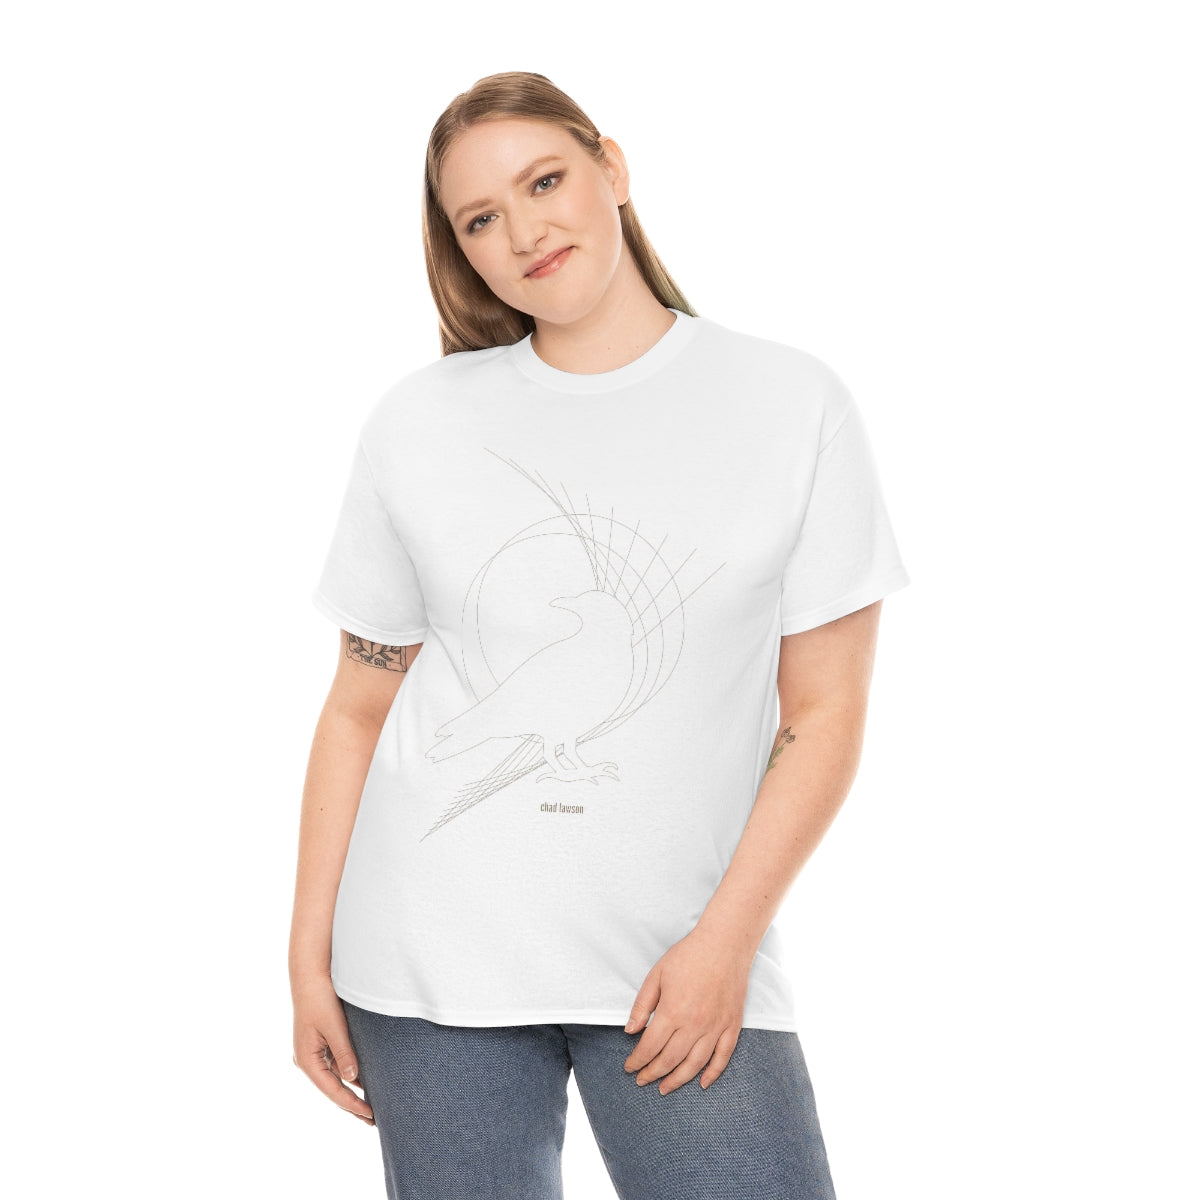 Raven Limited Edition - Heavy Cotton Tee - White